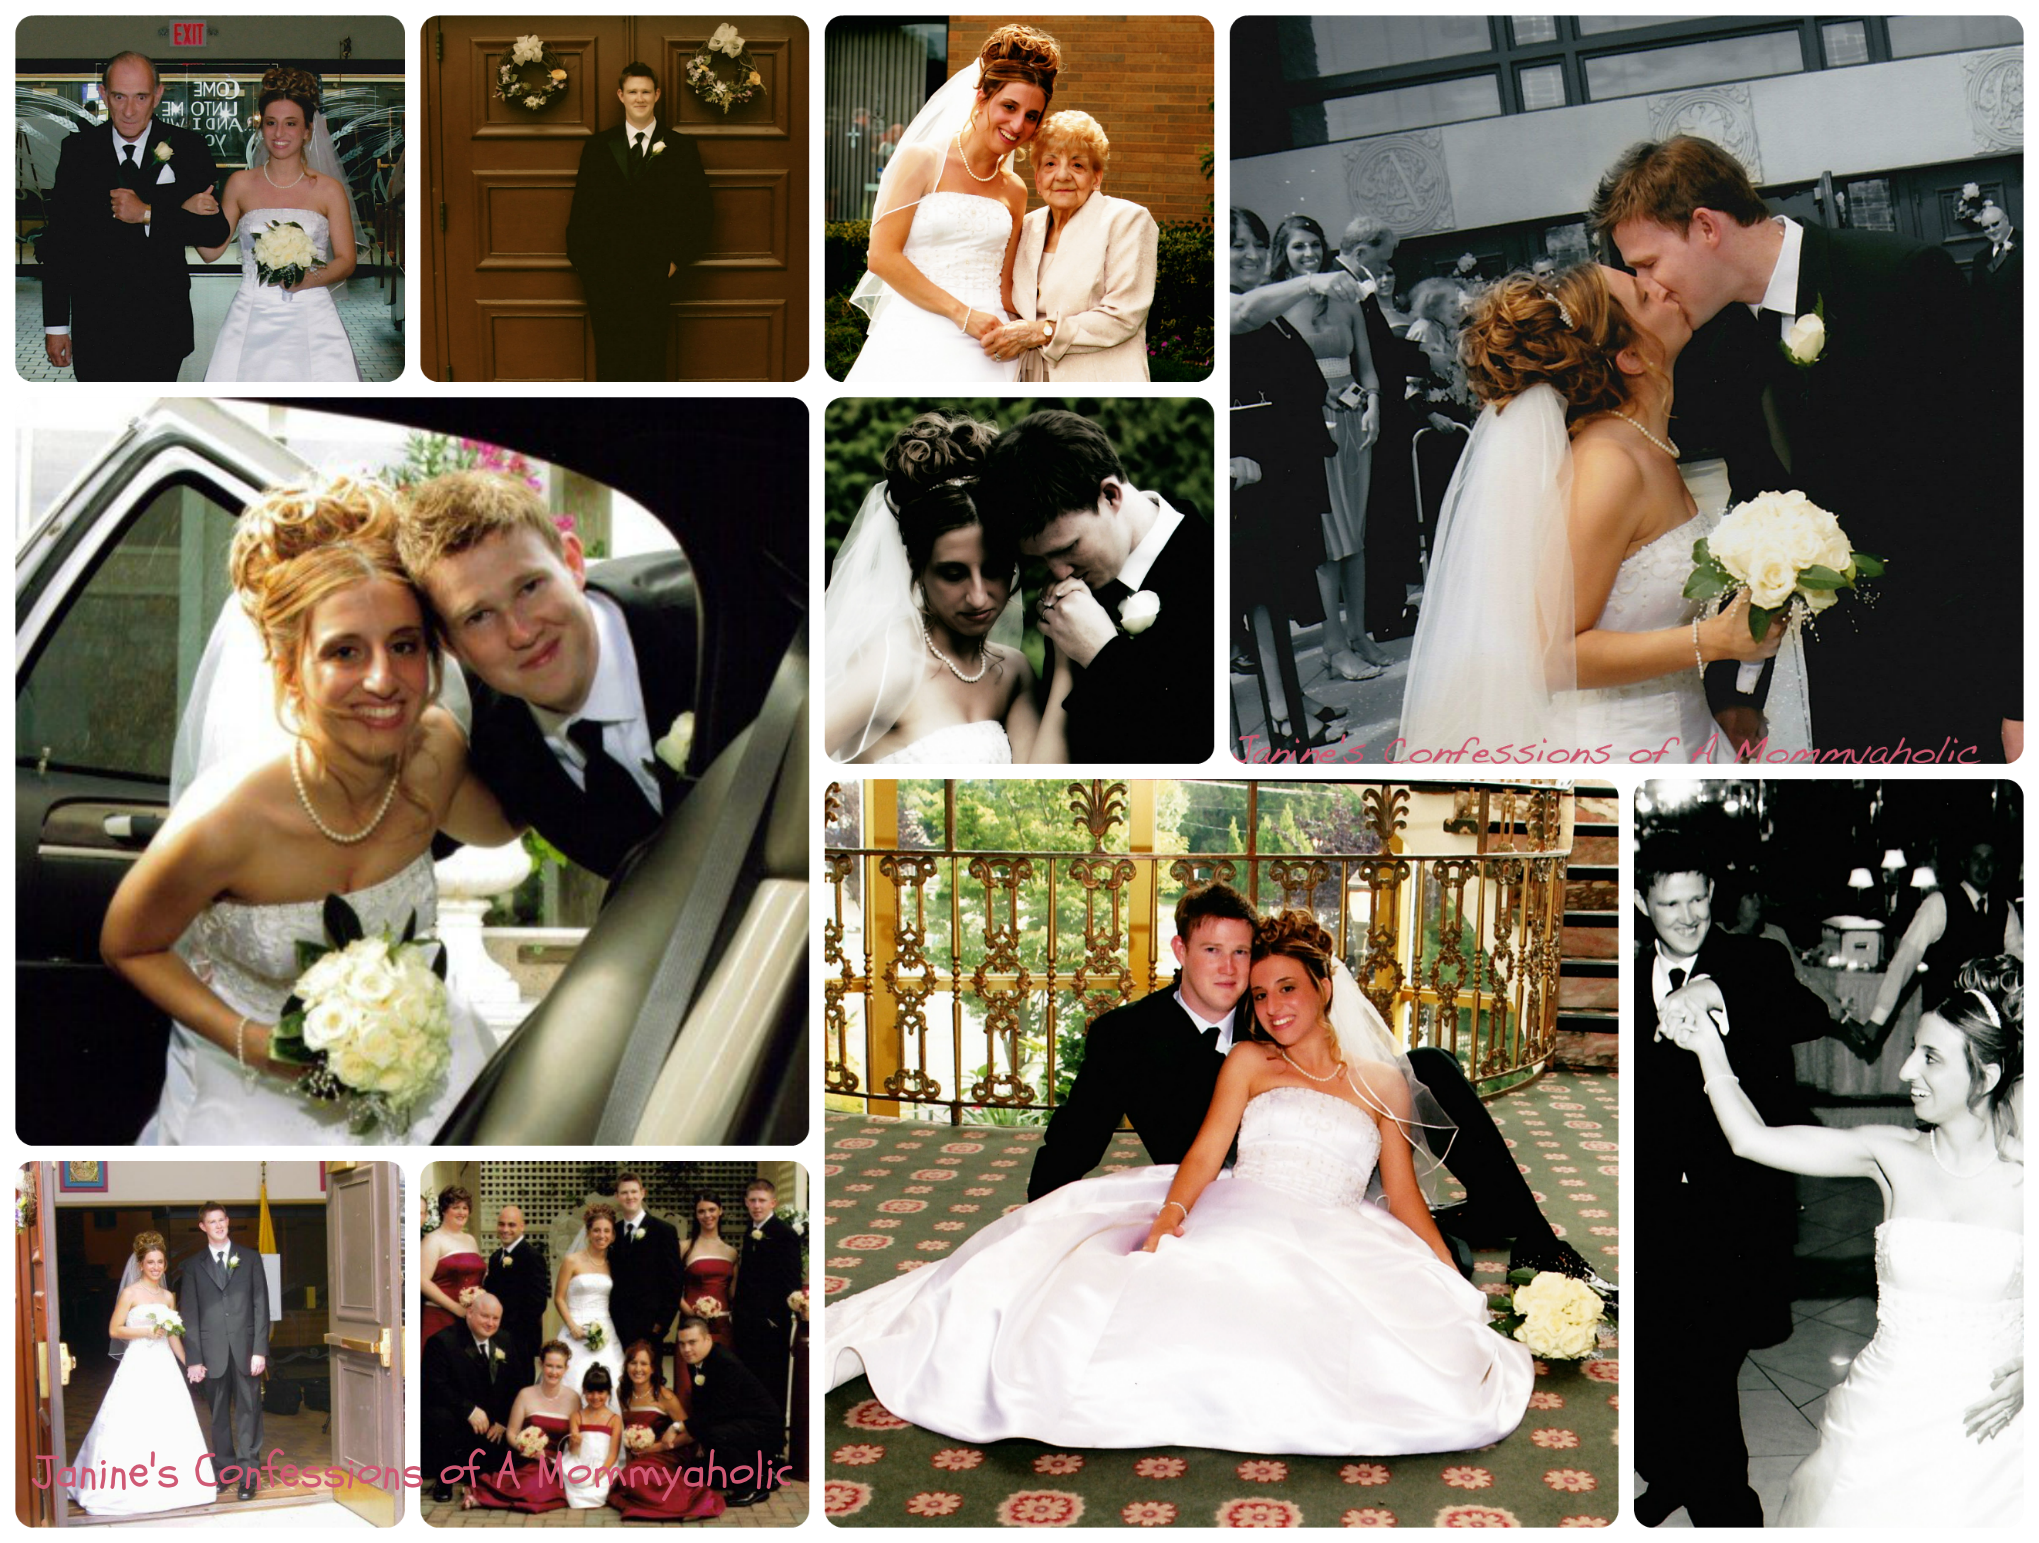 Our Wedding: July 8, 2006